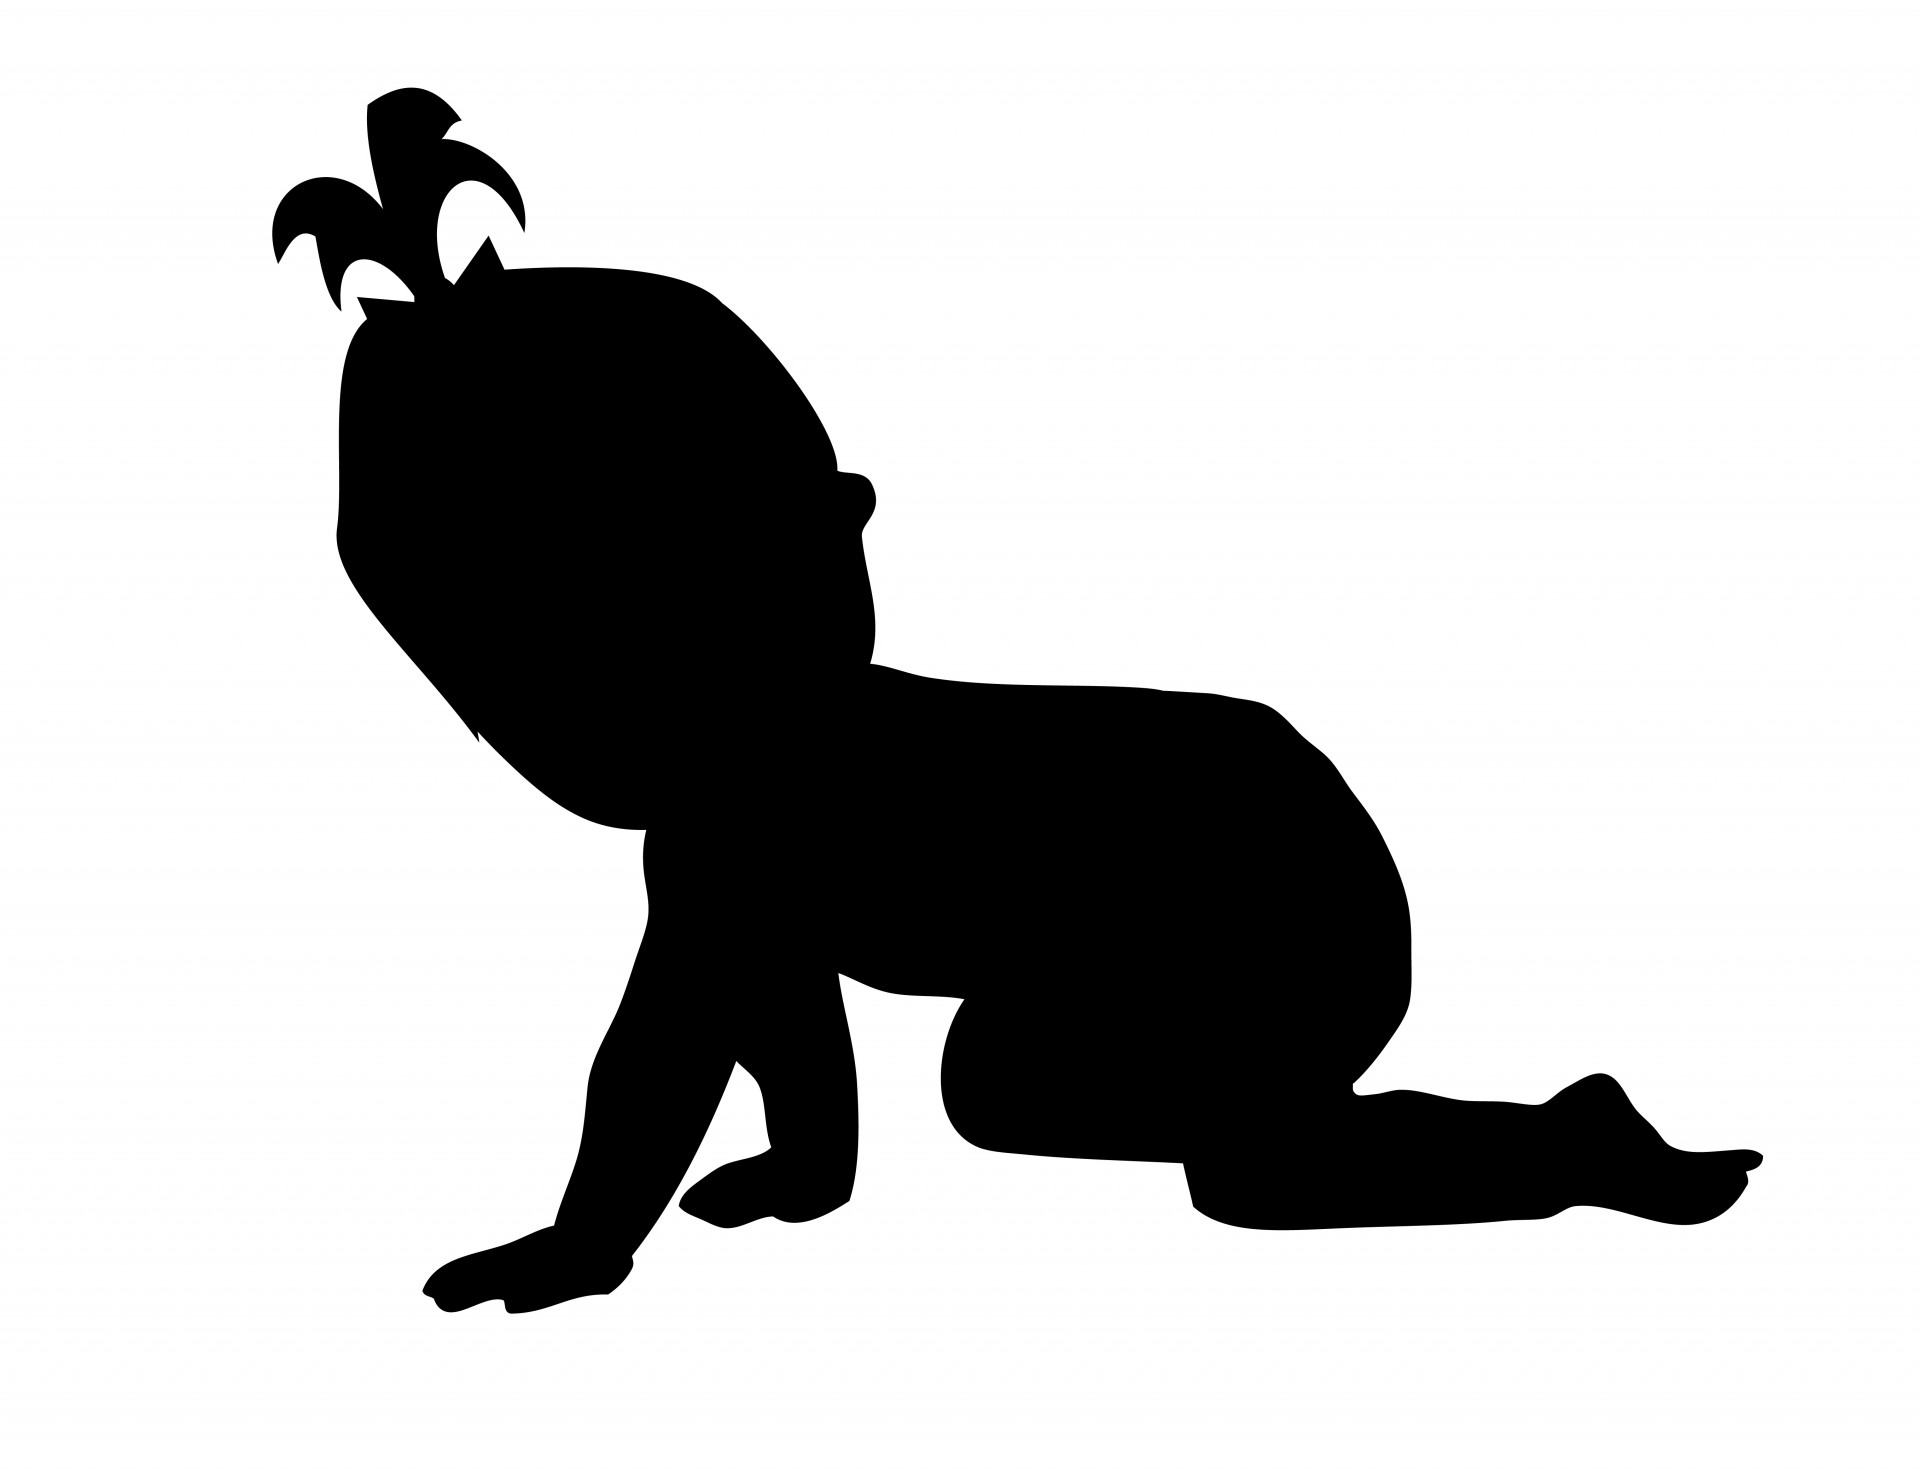 Baby clipart silhouette. At getdrawings com free